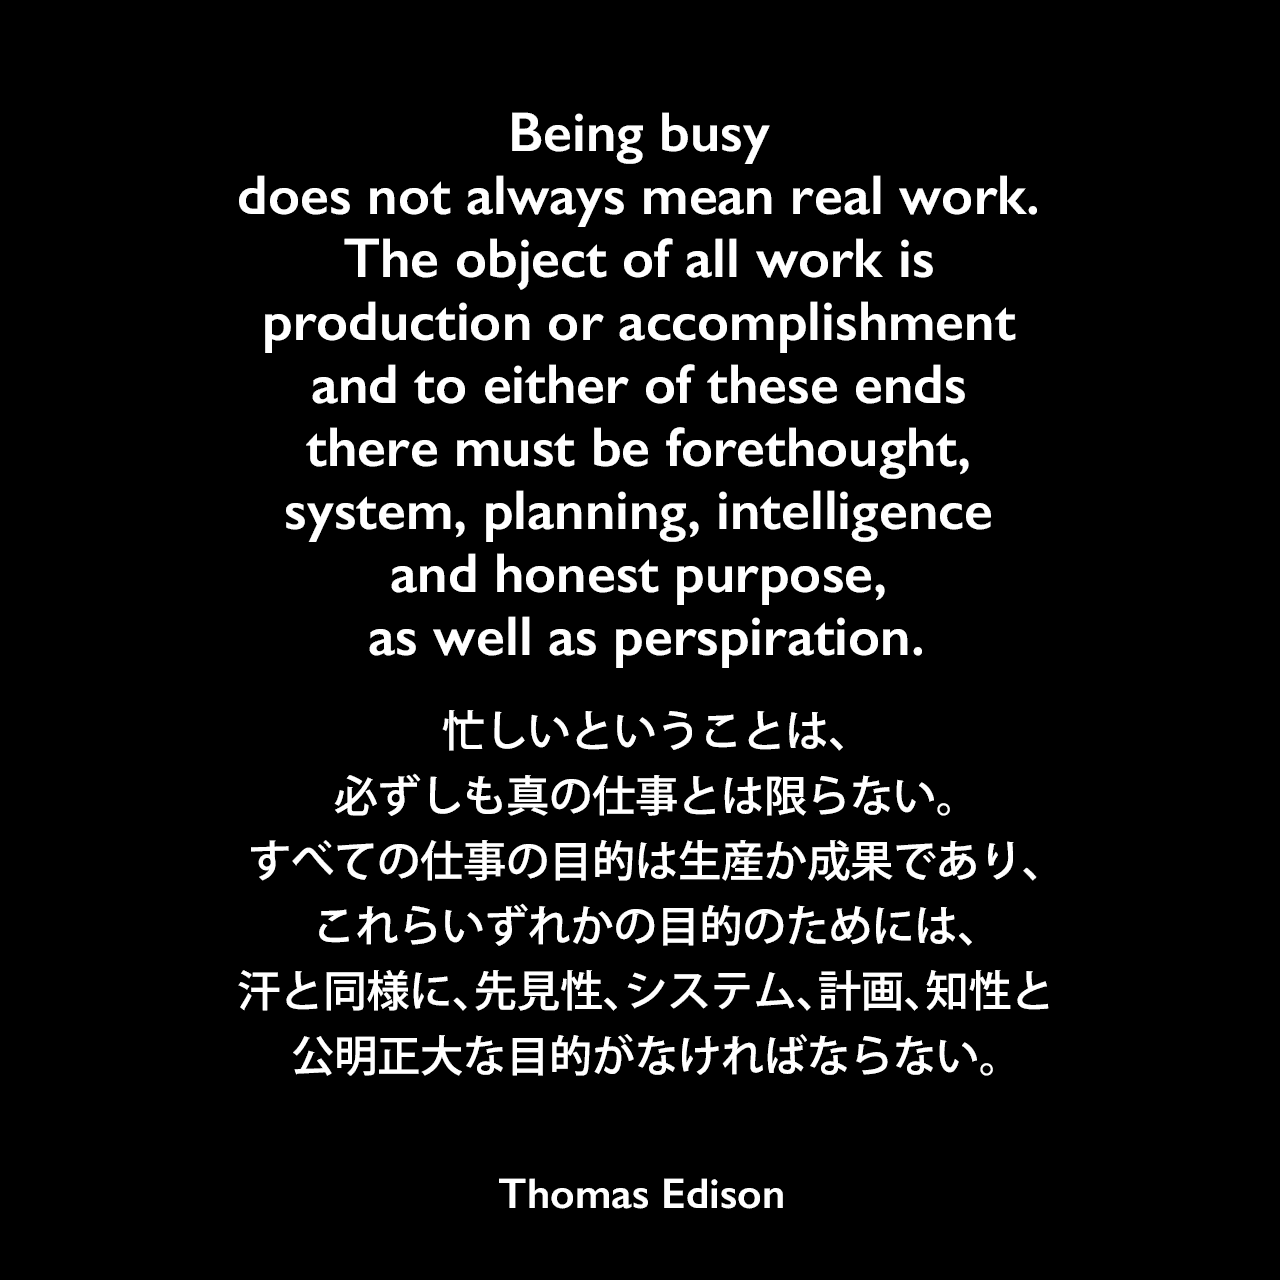 Being busy does not always mean real work. The object of all work is production or accomplishment and to either of these ends there must be forethought, system, planning, intelligence and honest purpose, as well as perspiration.忙しいということは、必ずしも真の仕事とは限らない。すべての仕事の目的は生産か成果であり、これらいずれかの目的のためには、汗と同様に、先見性、システム、計画、知性と公明正大な目的がなければならない。- Edison Innovation Foundationよりエジソンの言葉として引用Thomas Edison